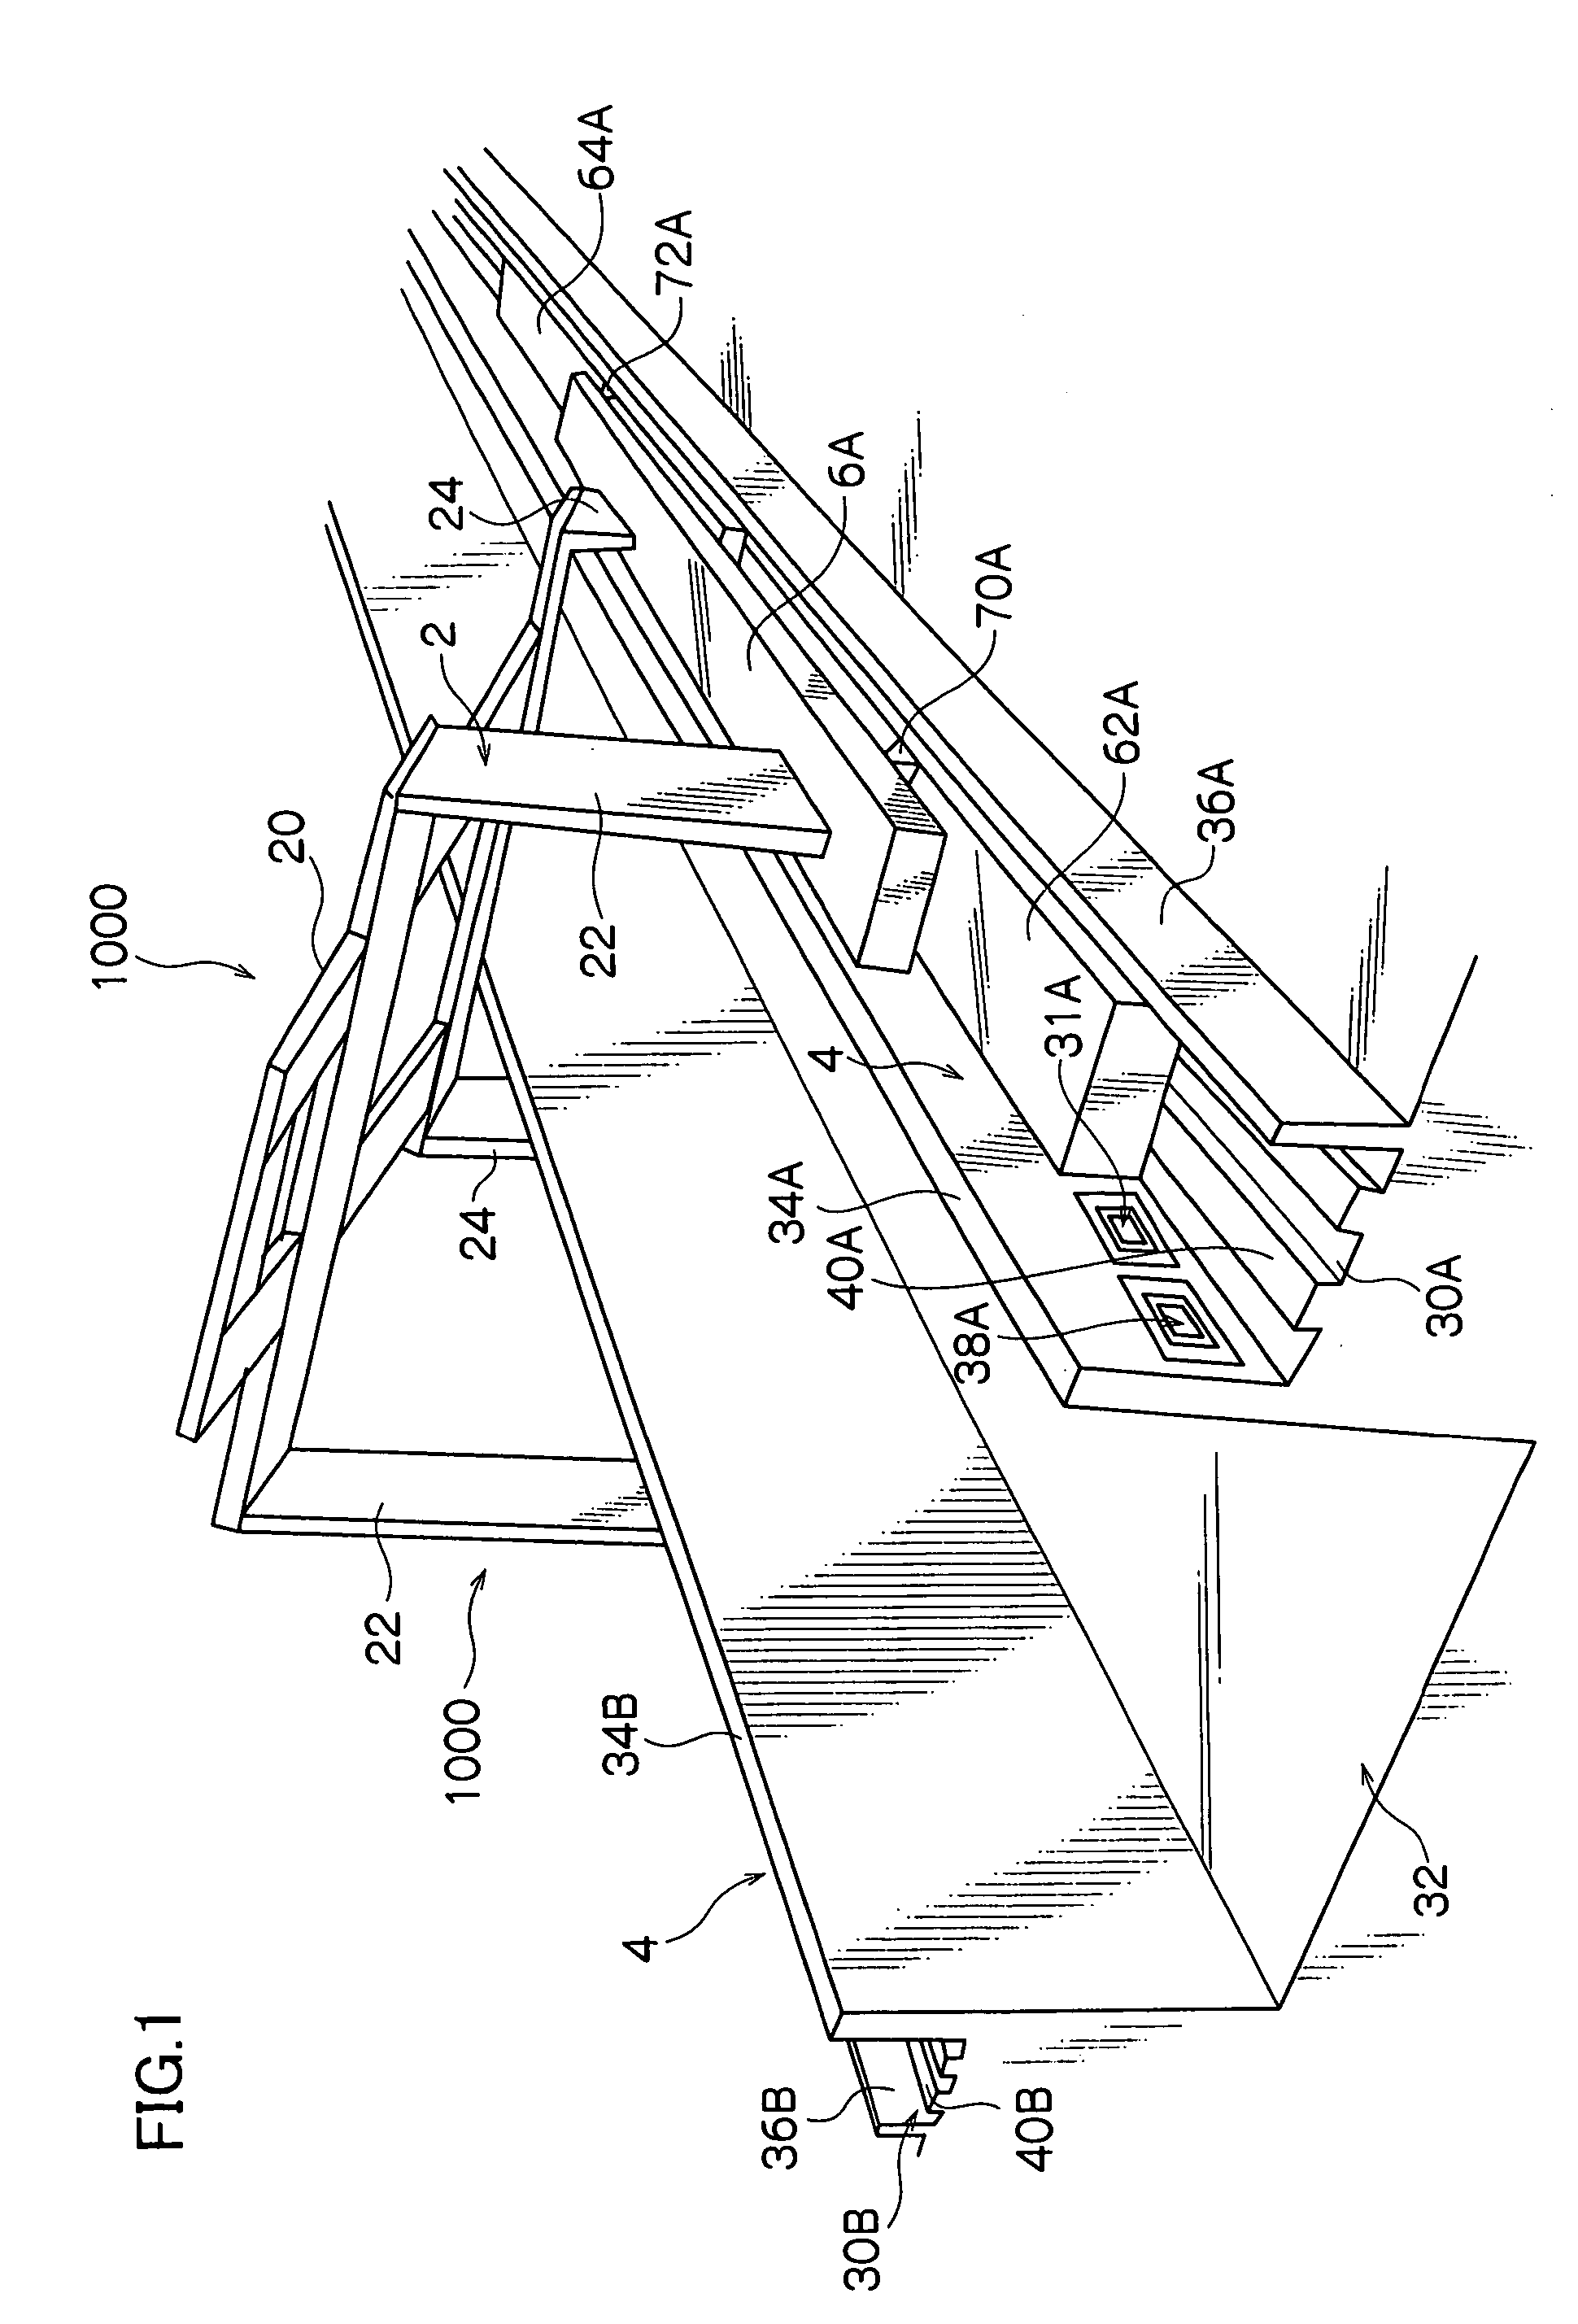 Flying vehicle-launching apparatus and method